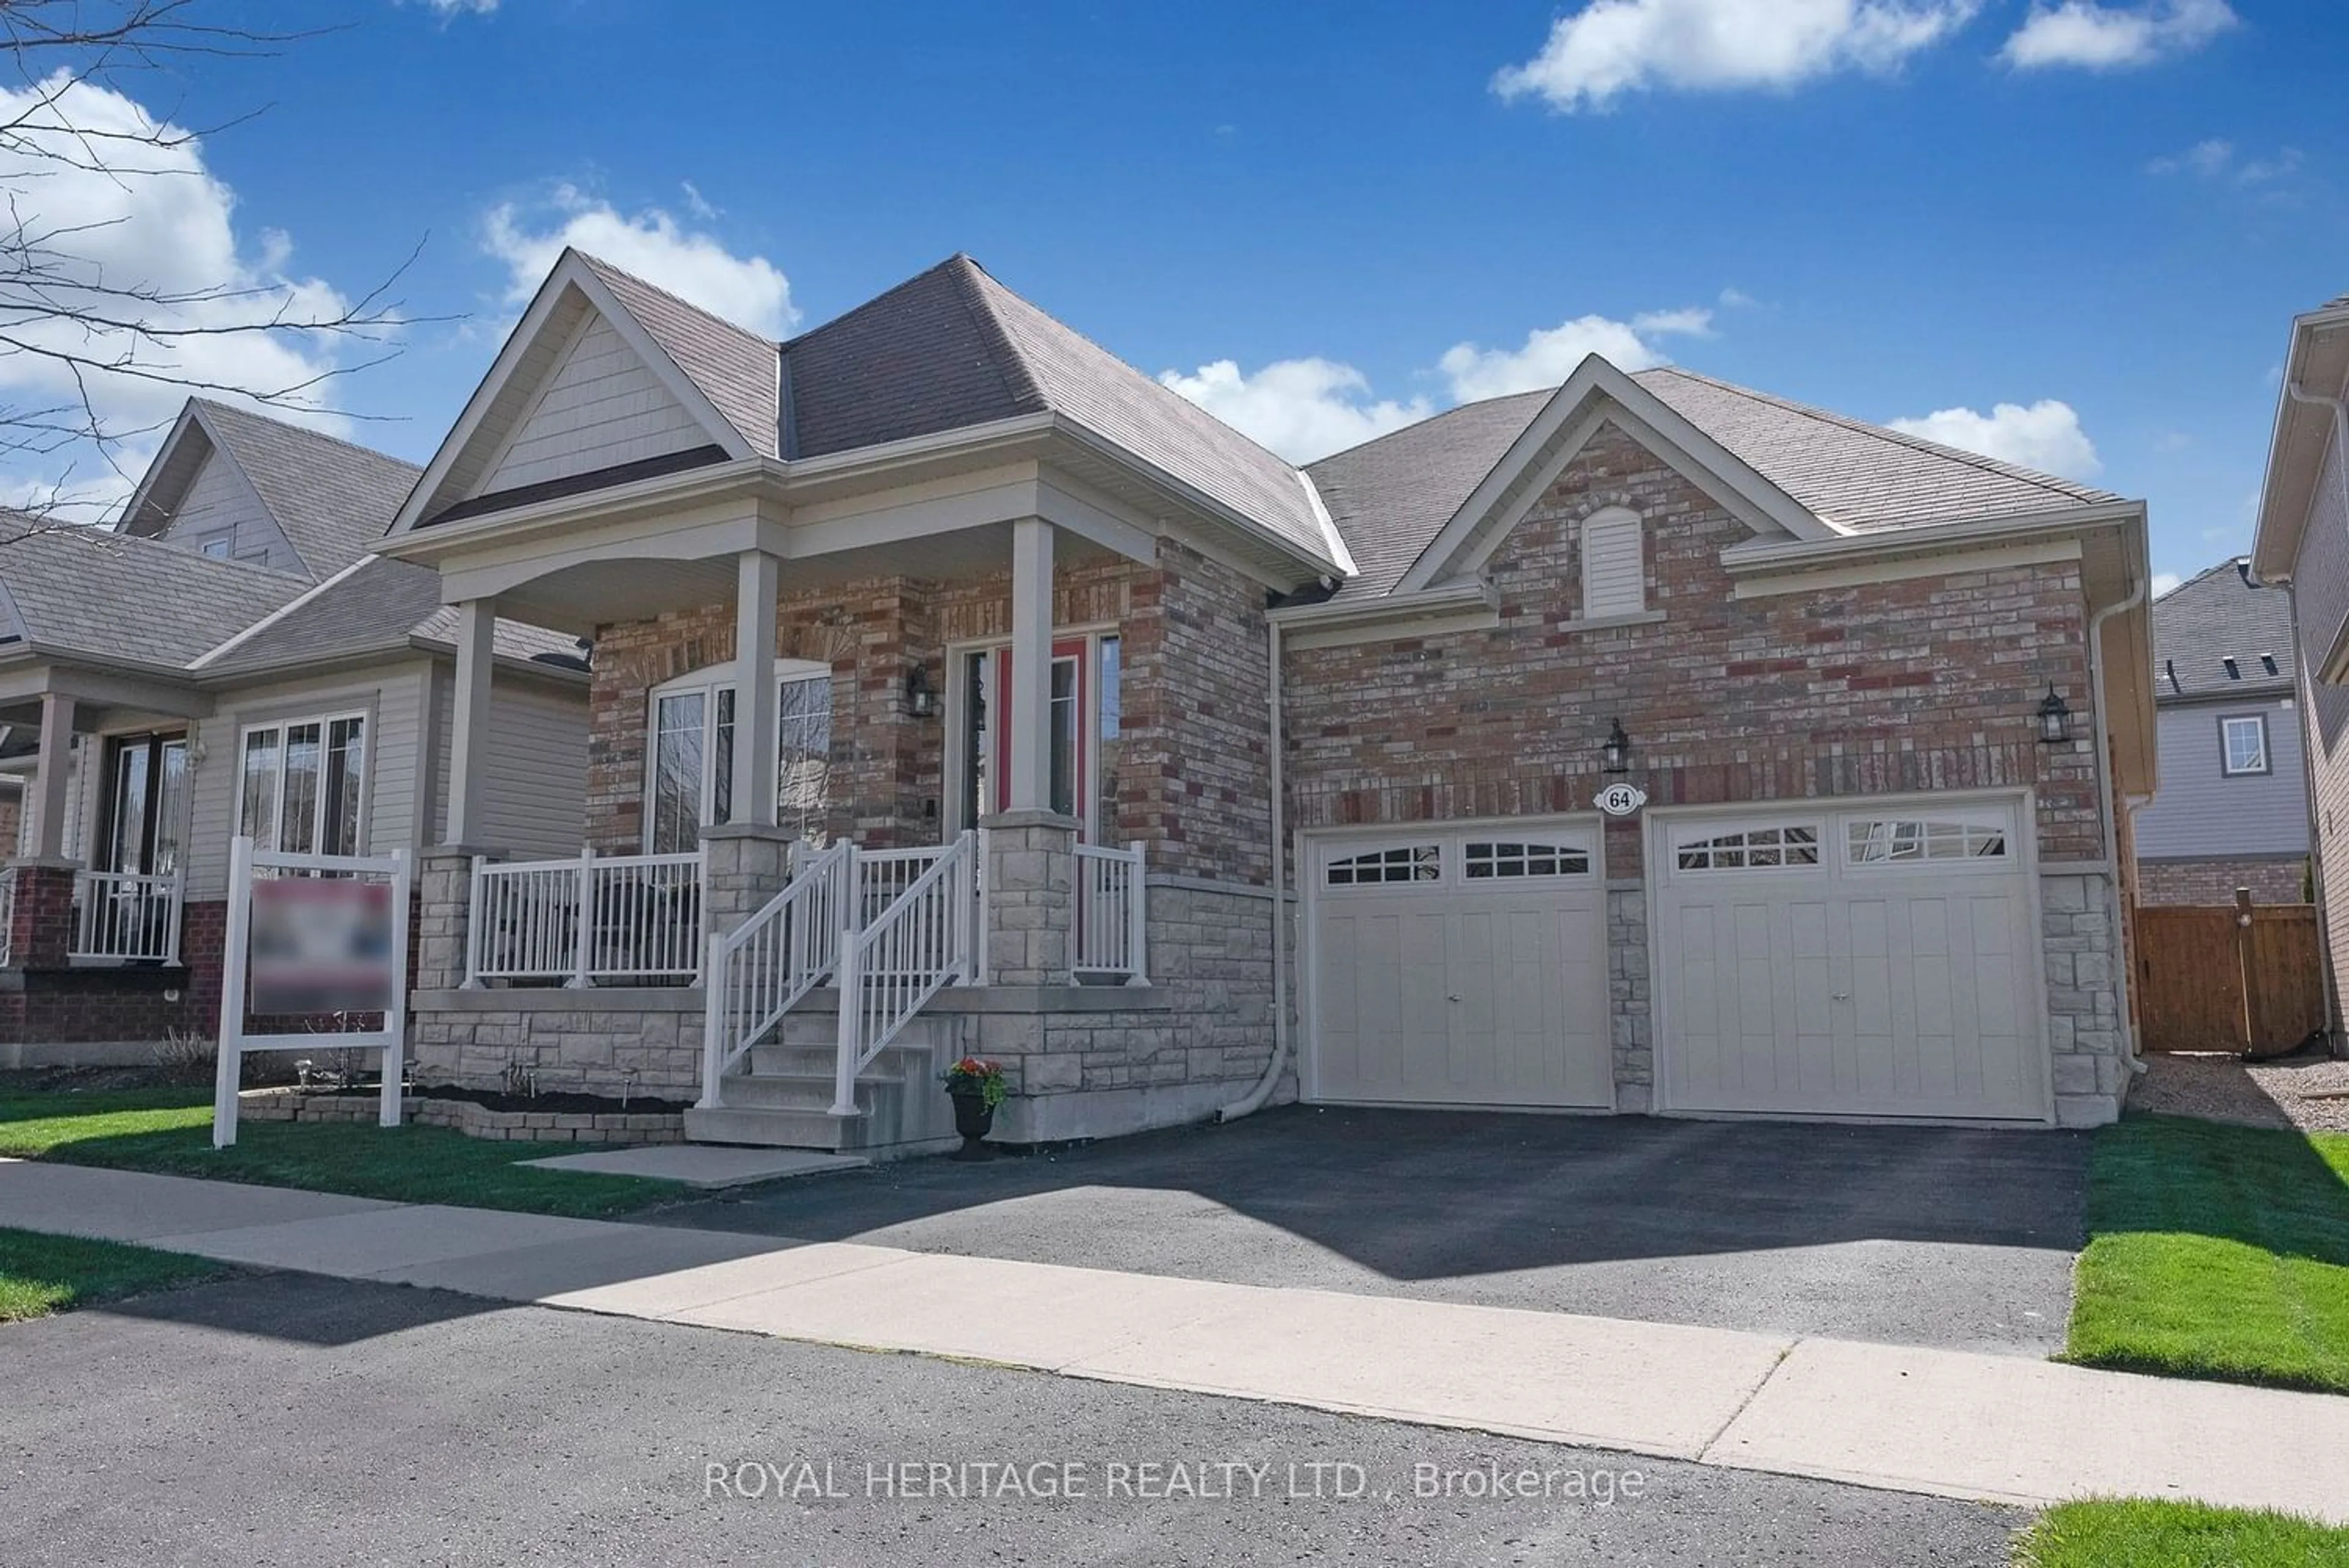 Frontside or backside of a home for 64 Keating Dr, Clarington Ontario L1B 0B9